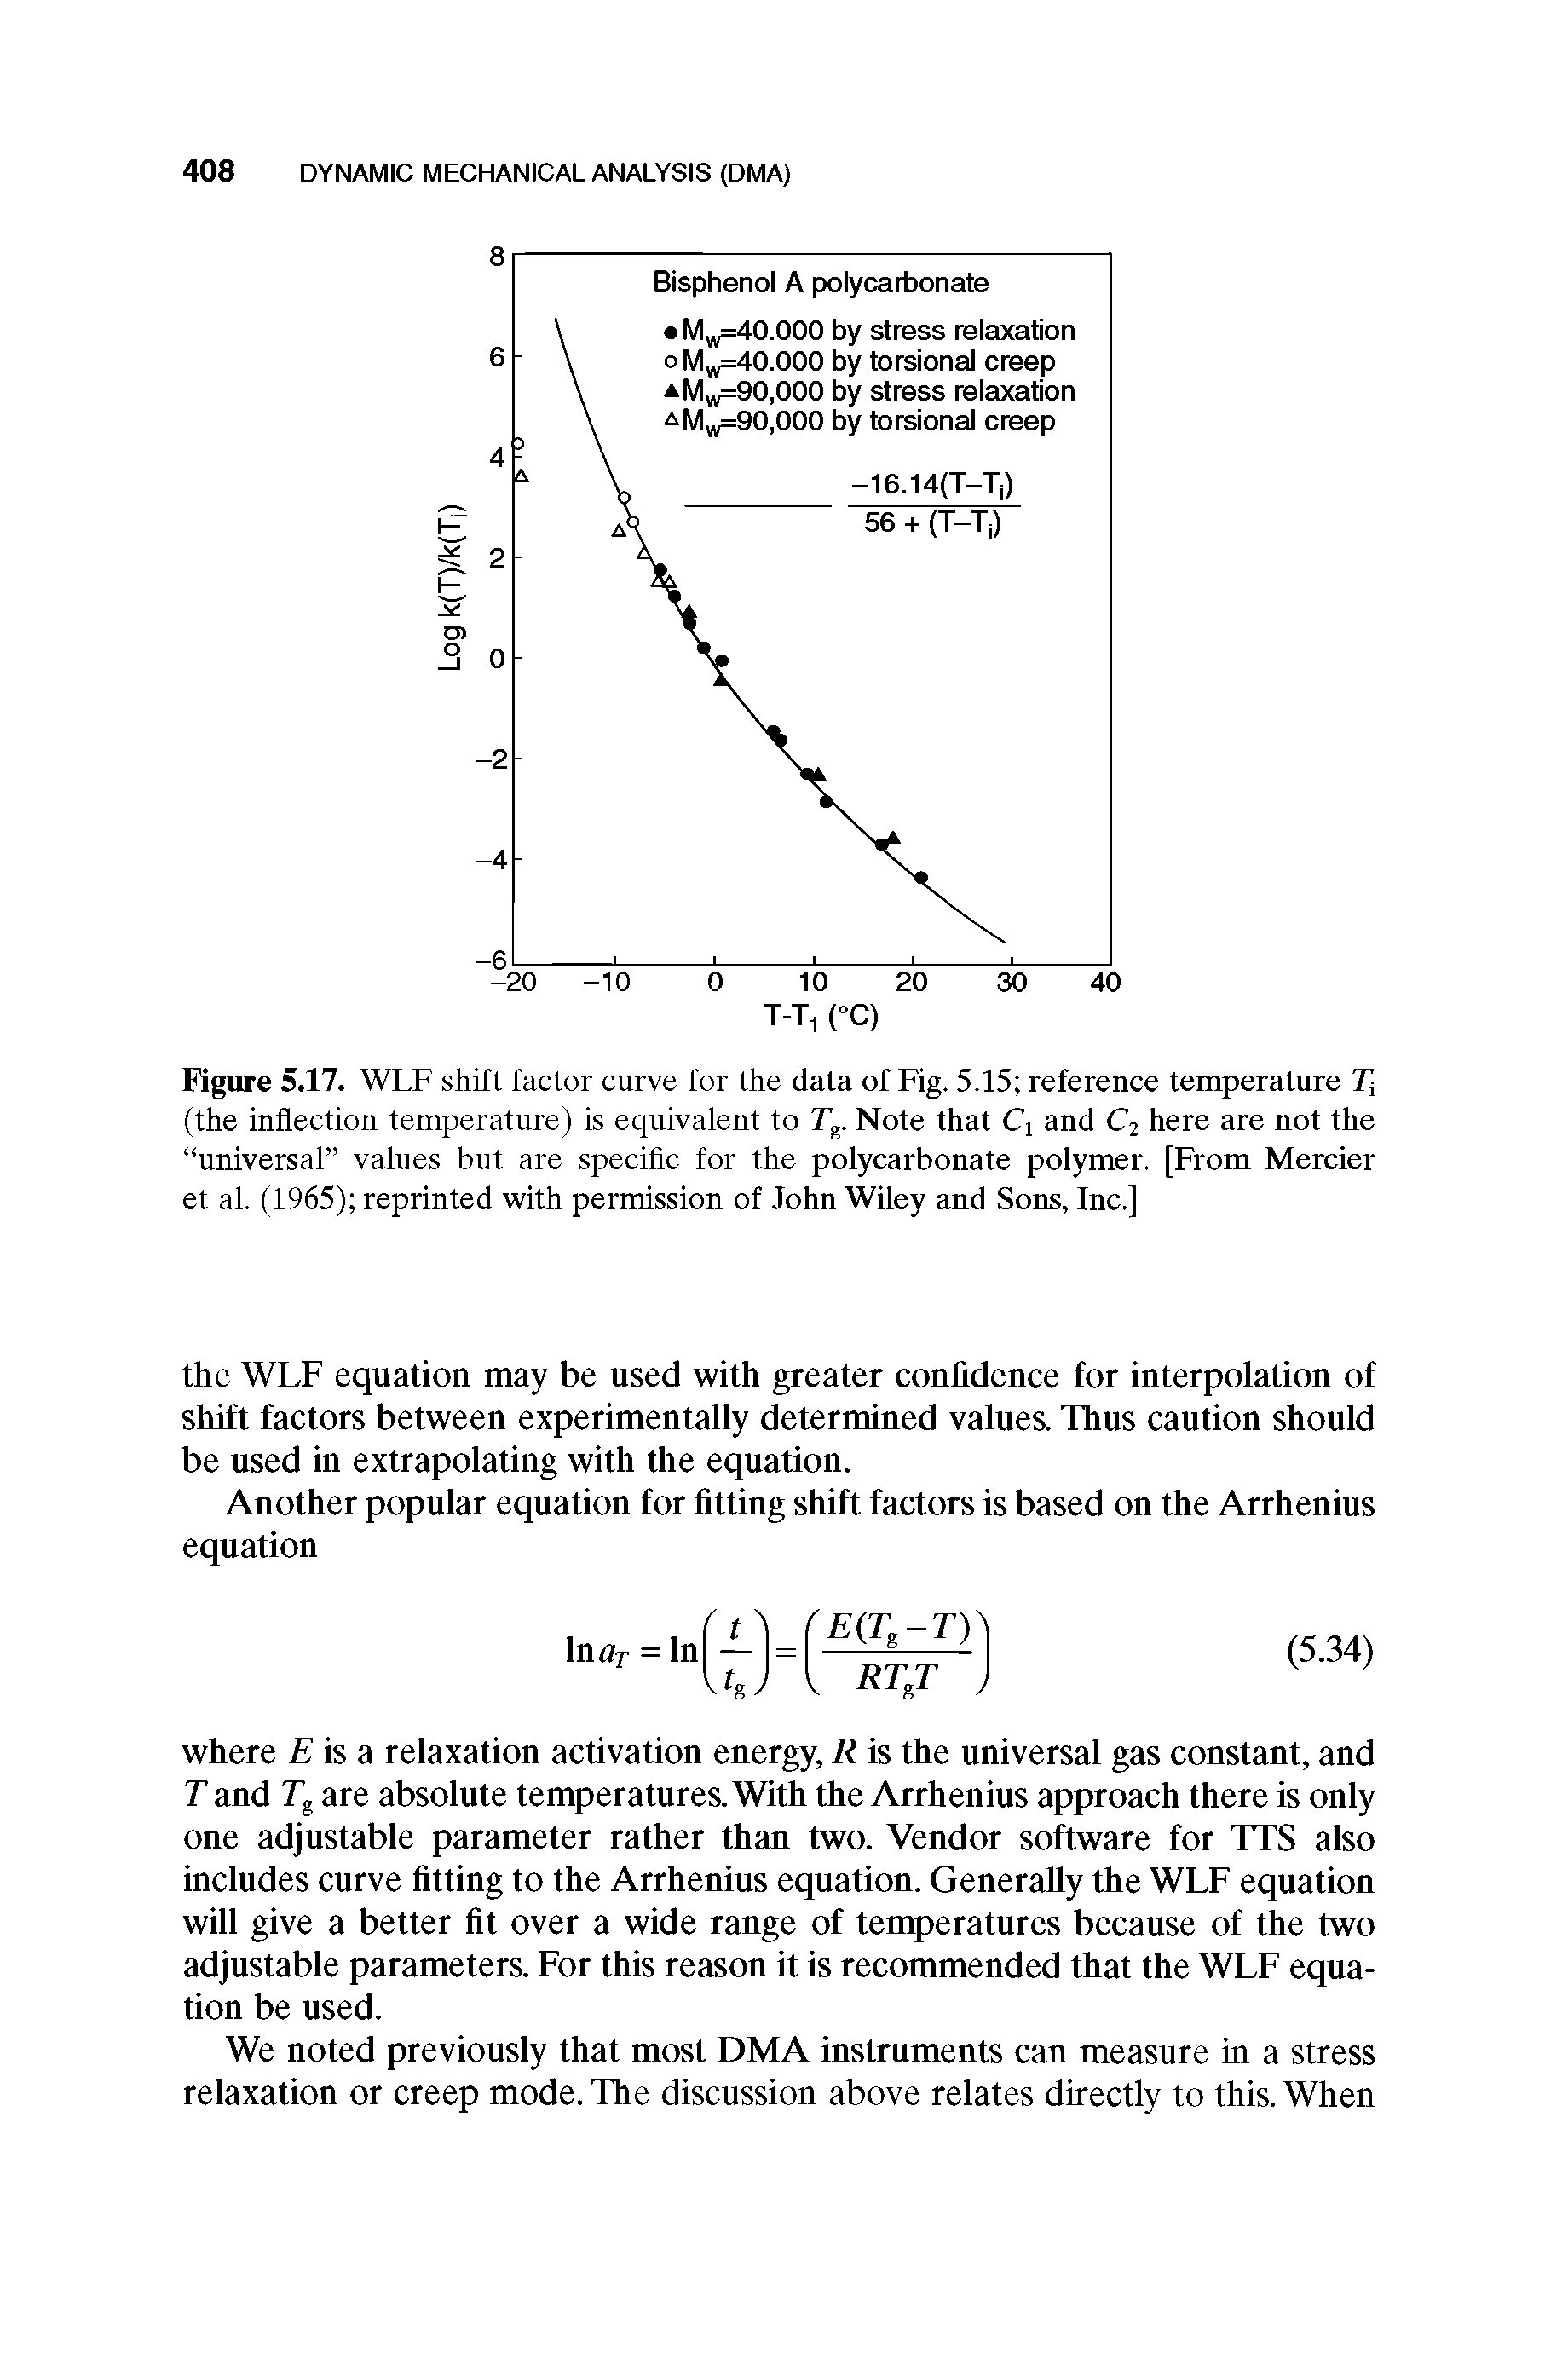 Figure 5.17. WLF shift factor curve for the data of Fig. 5.15 reference temperature Ti (the inflection temperature) is equivalent to Tg. Note that Q and C2 here are not the universal values but are specific for the polycarbonate polymer. [From Mercier et al. (1965) reprinted with permission of John Wiley and Sons, Inc.]...